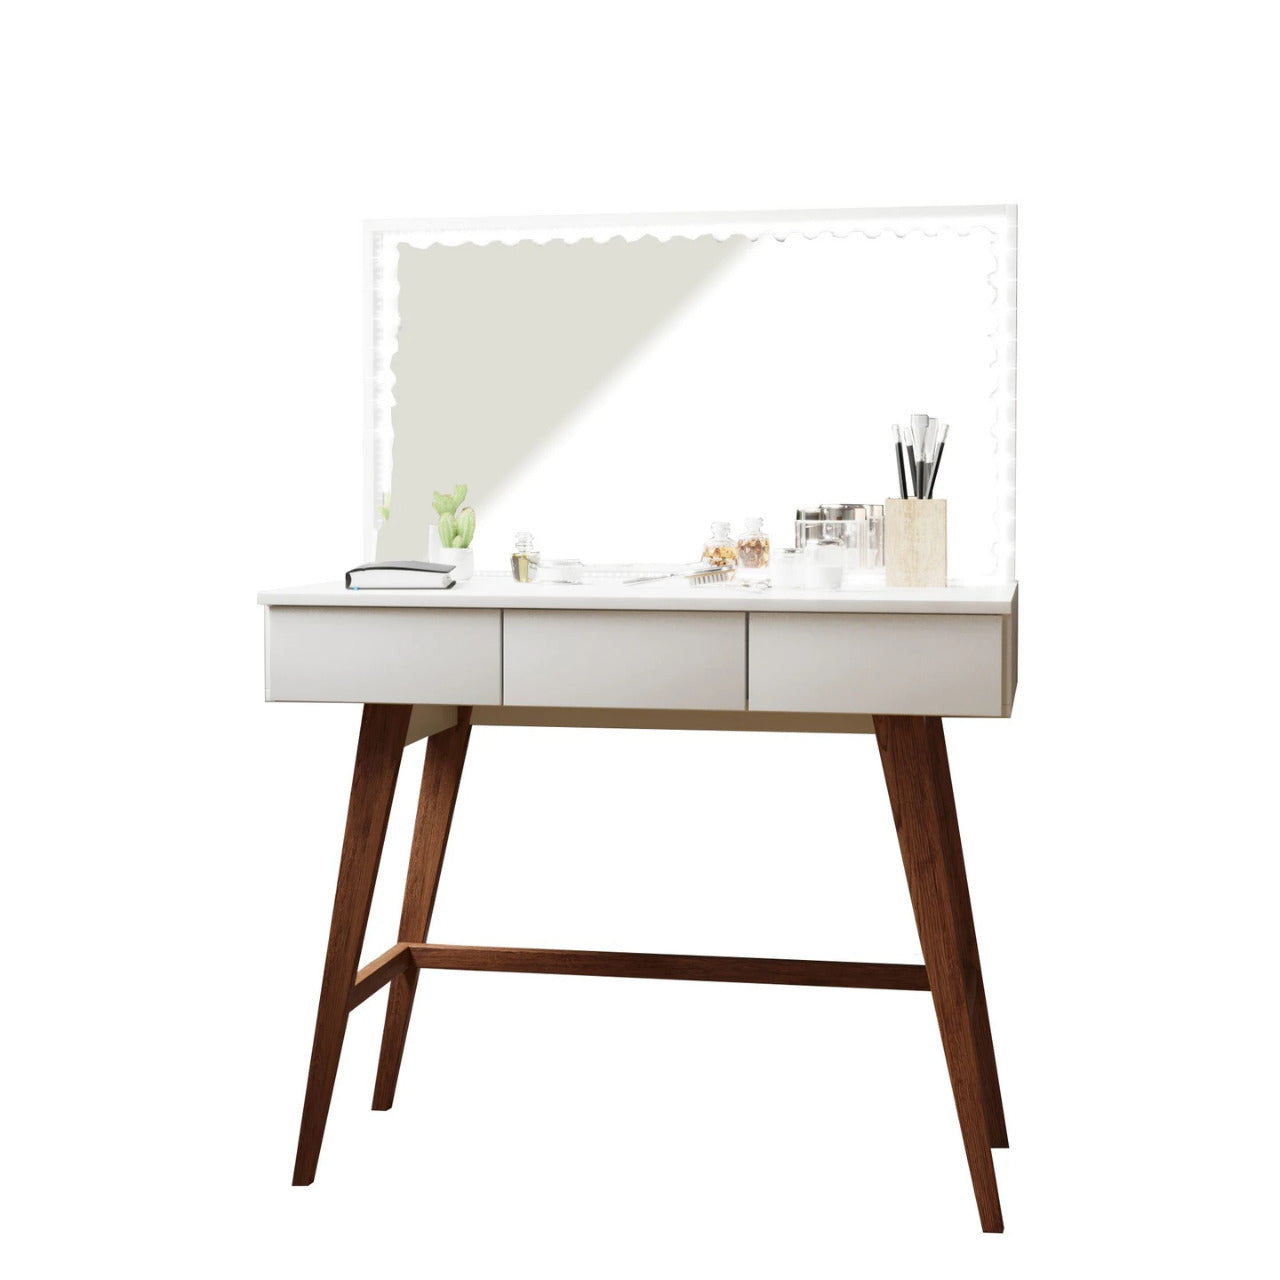 Makeup Vanity: Dressing Table with 3 drawers, wood legs & LED Lights